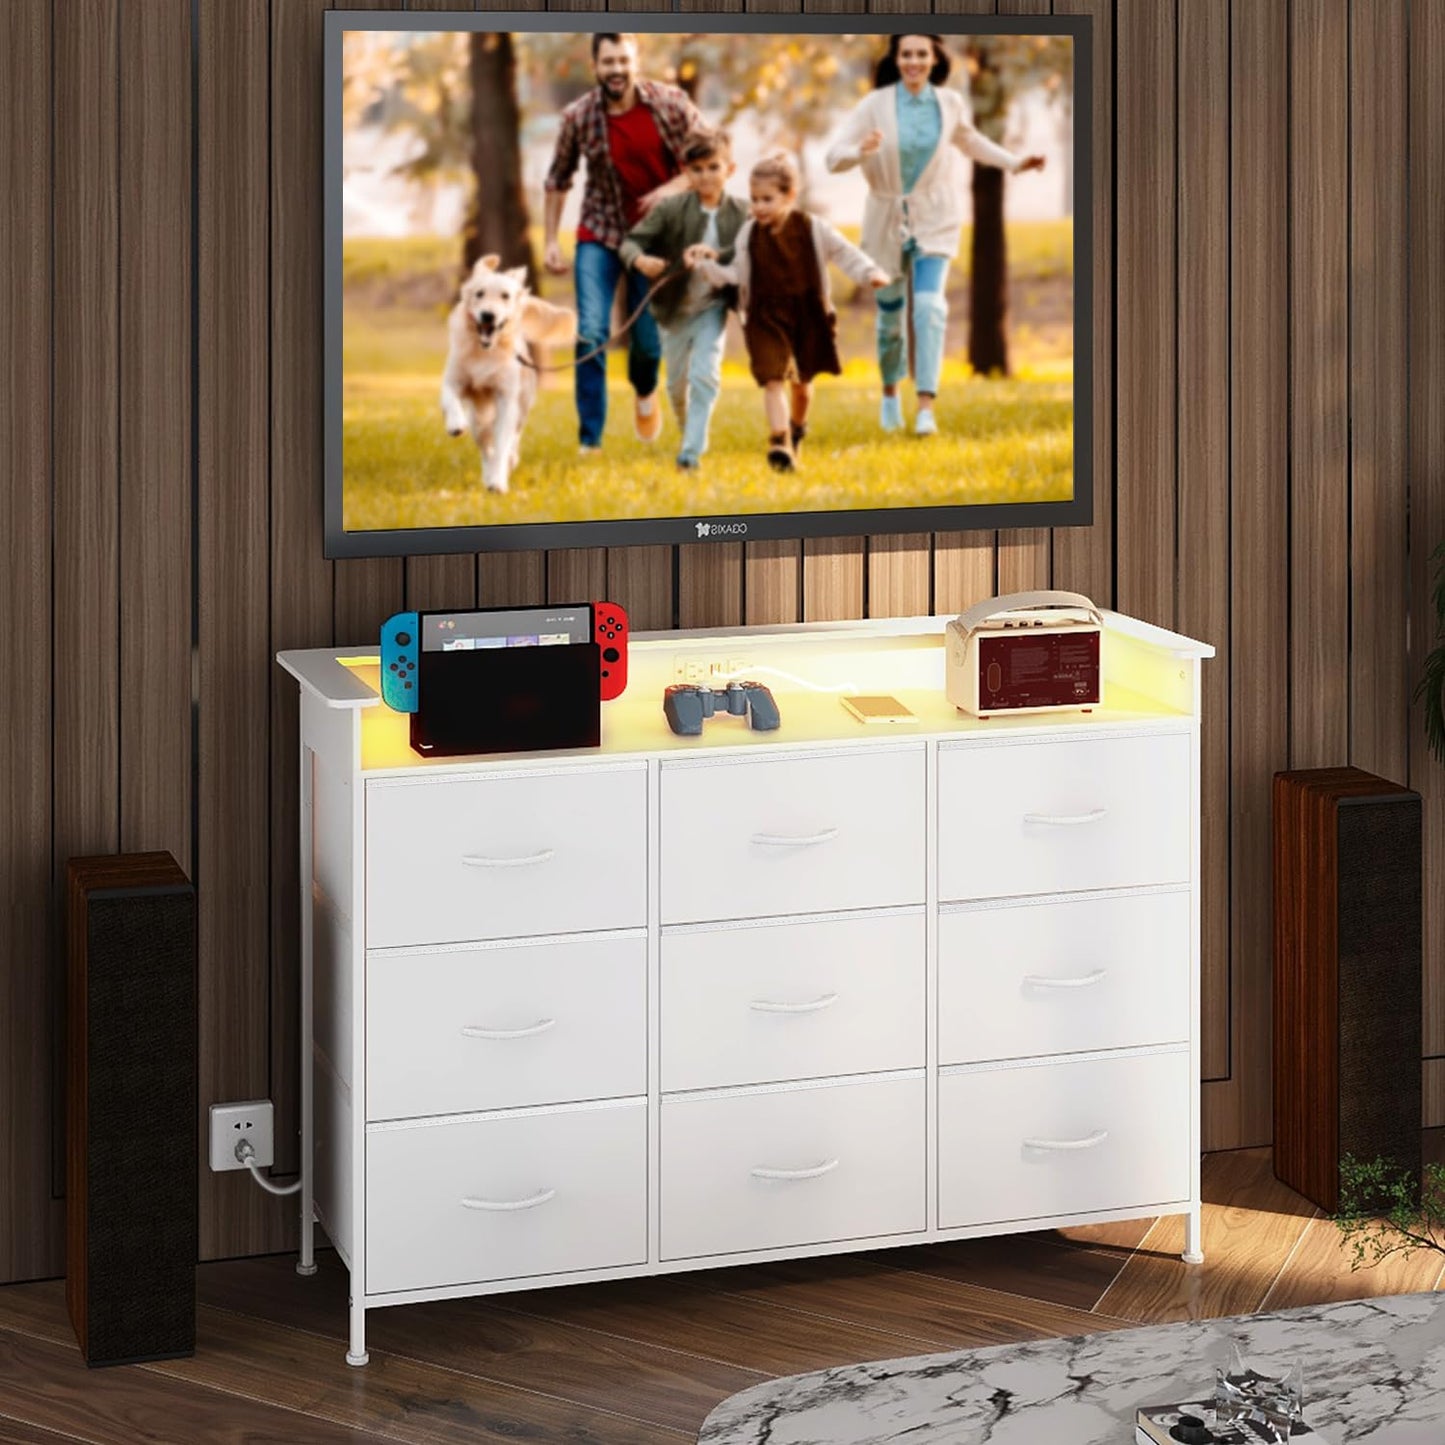 EXOTICA White Dresser with LED Light for Bedroom 9 Drawer Dressers with Charging Station Chests of Drawers for Entryway Closet Living Room Hallway Sturdy Steel Frame Wooden Top Easy Pull Handle